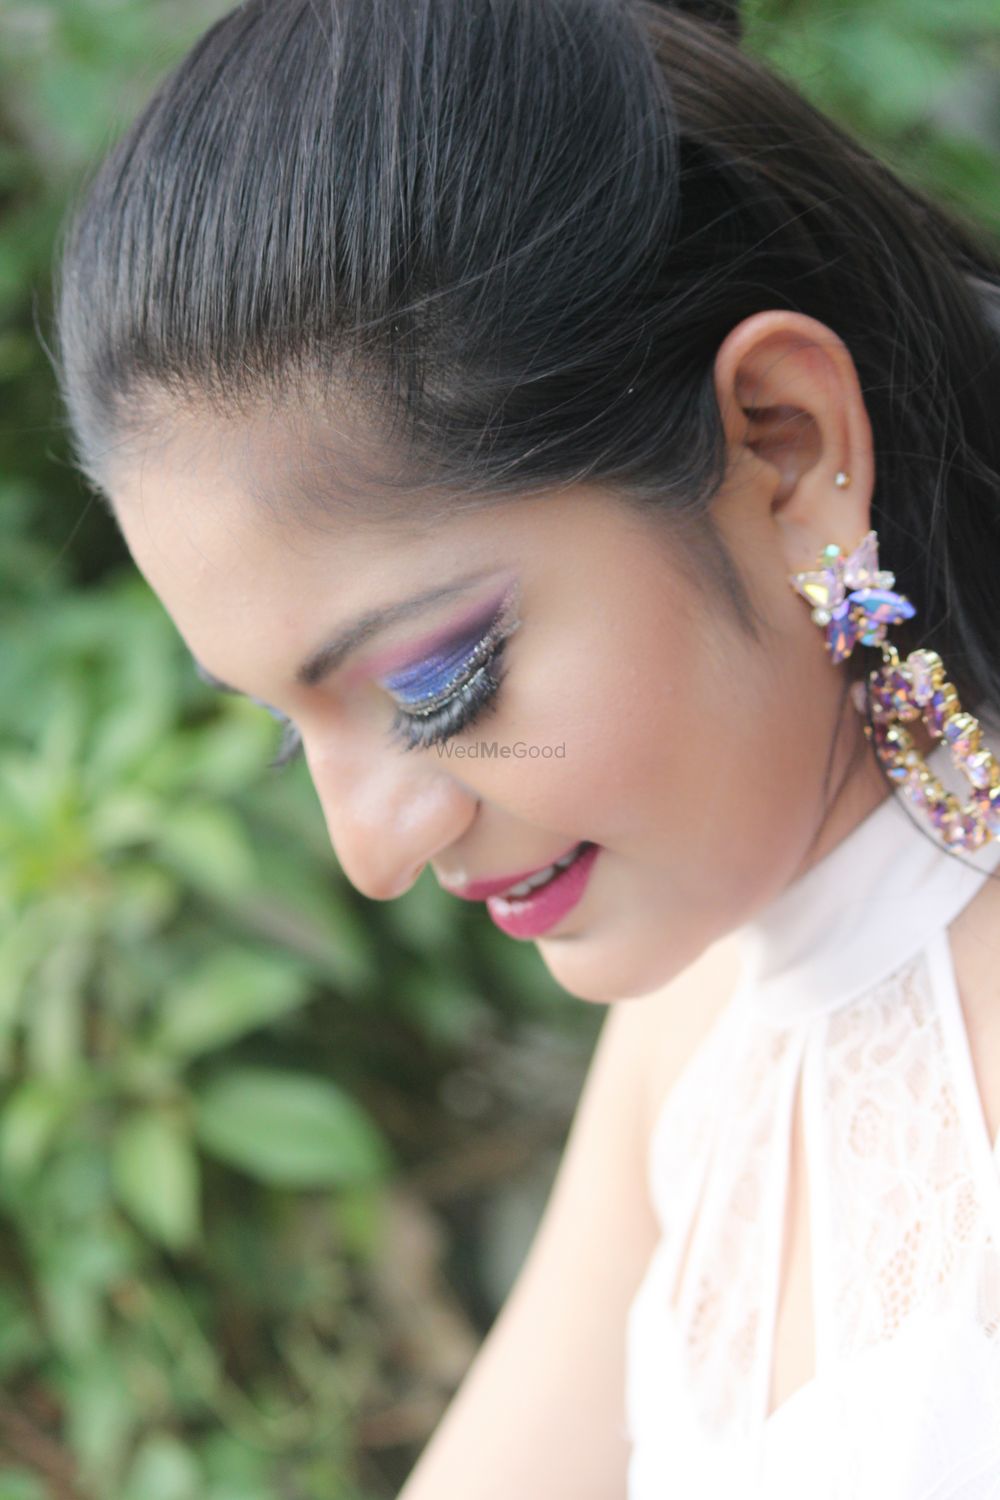 Photo From The prewedding look - By Makeup Your Mood